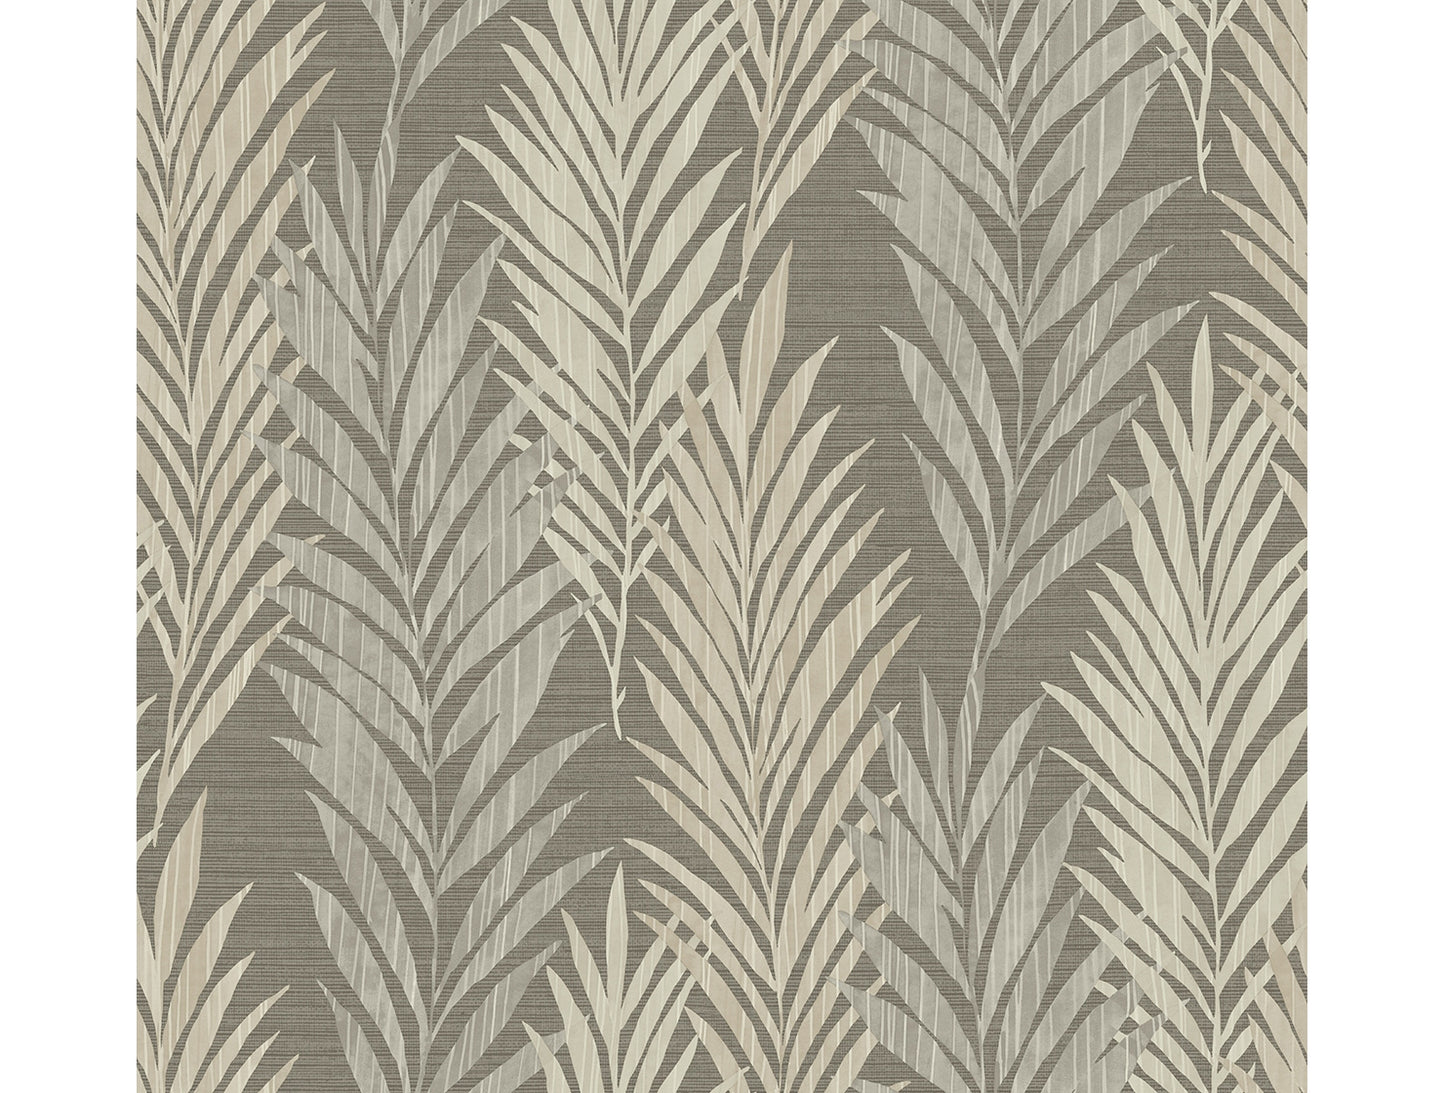 Tropical Textured Leaves